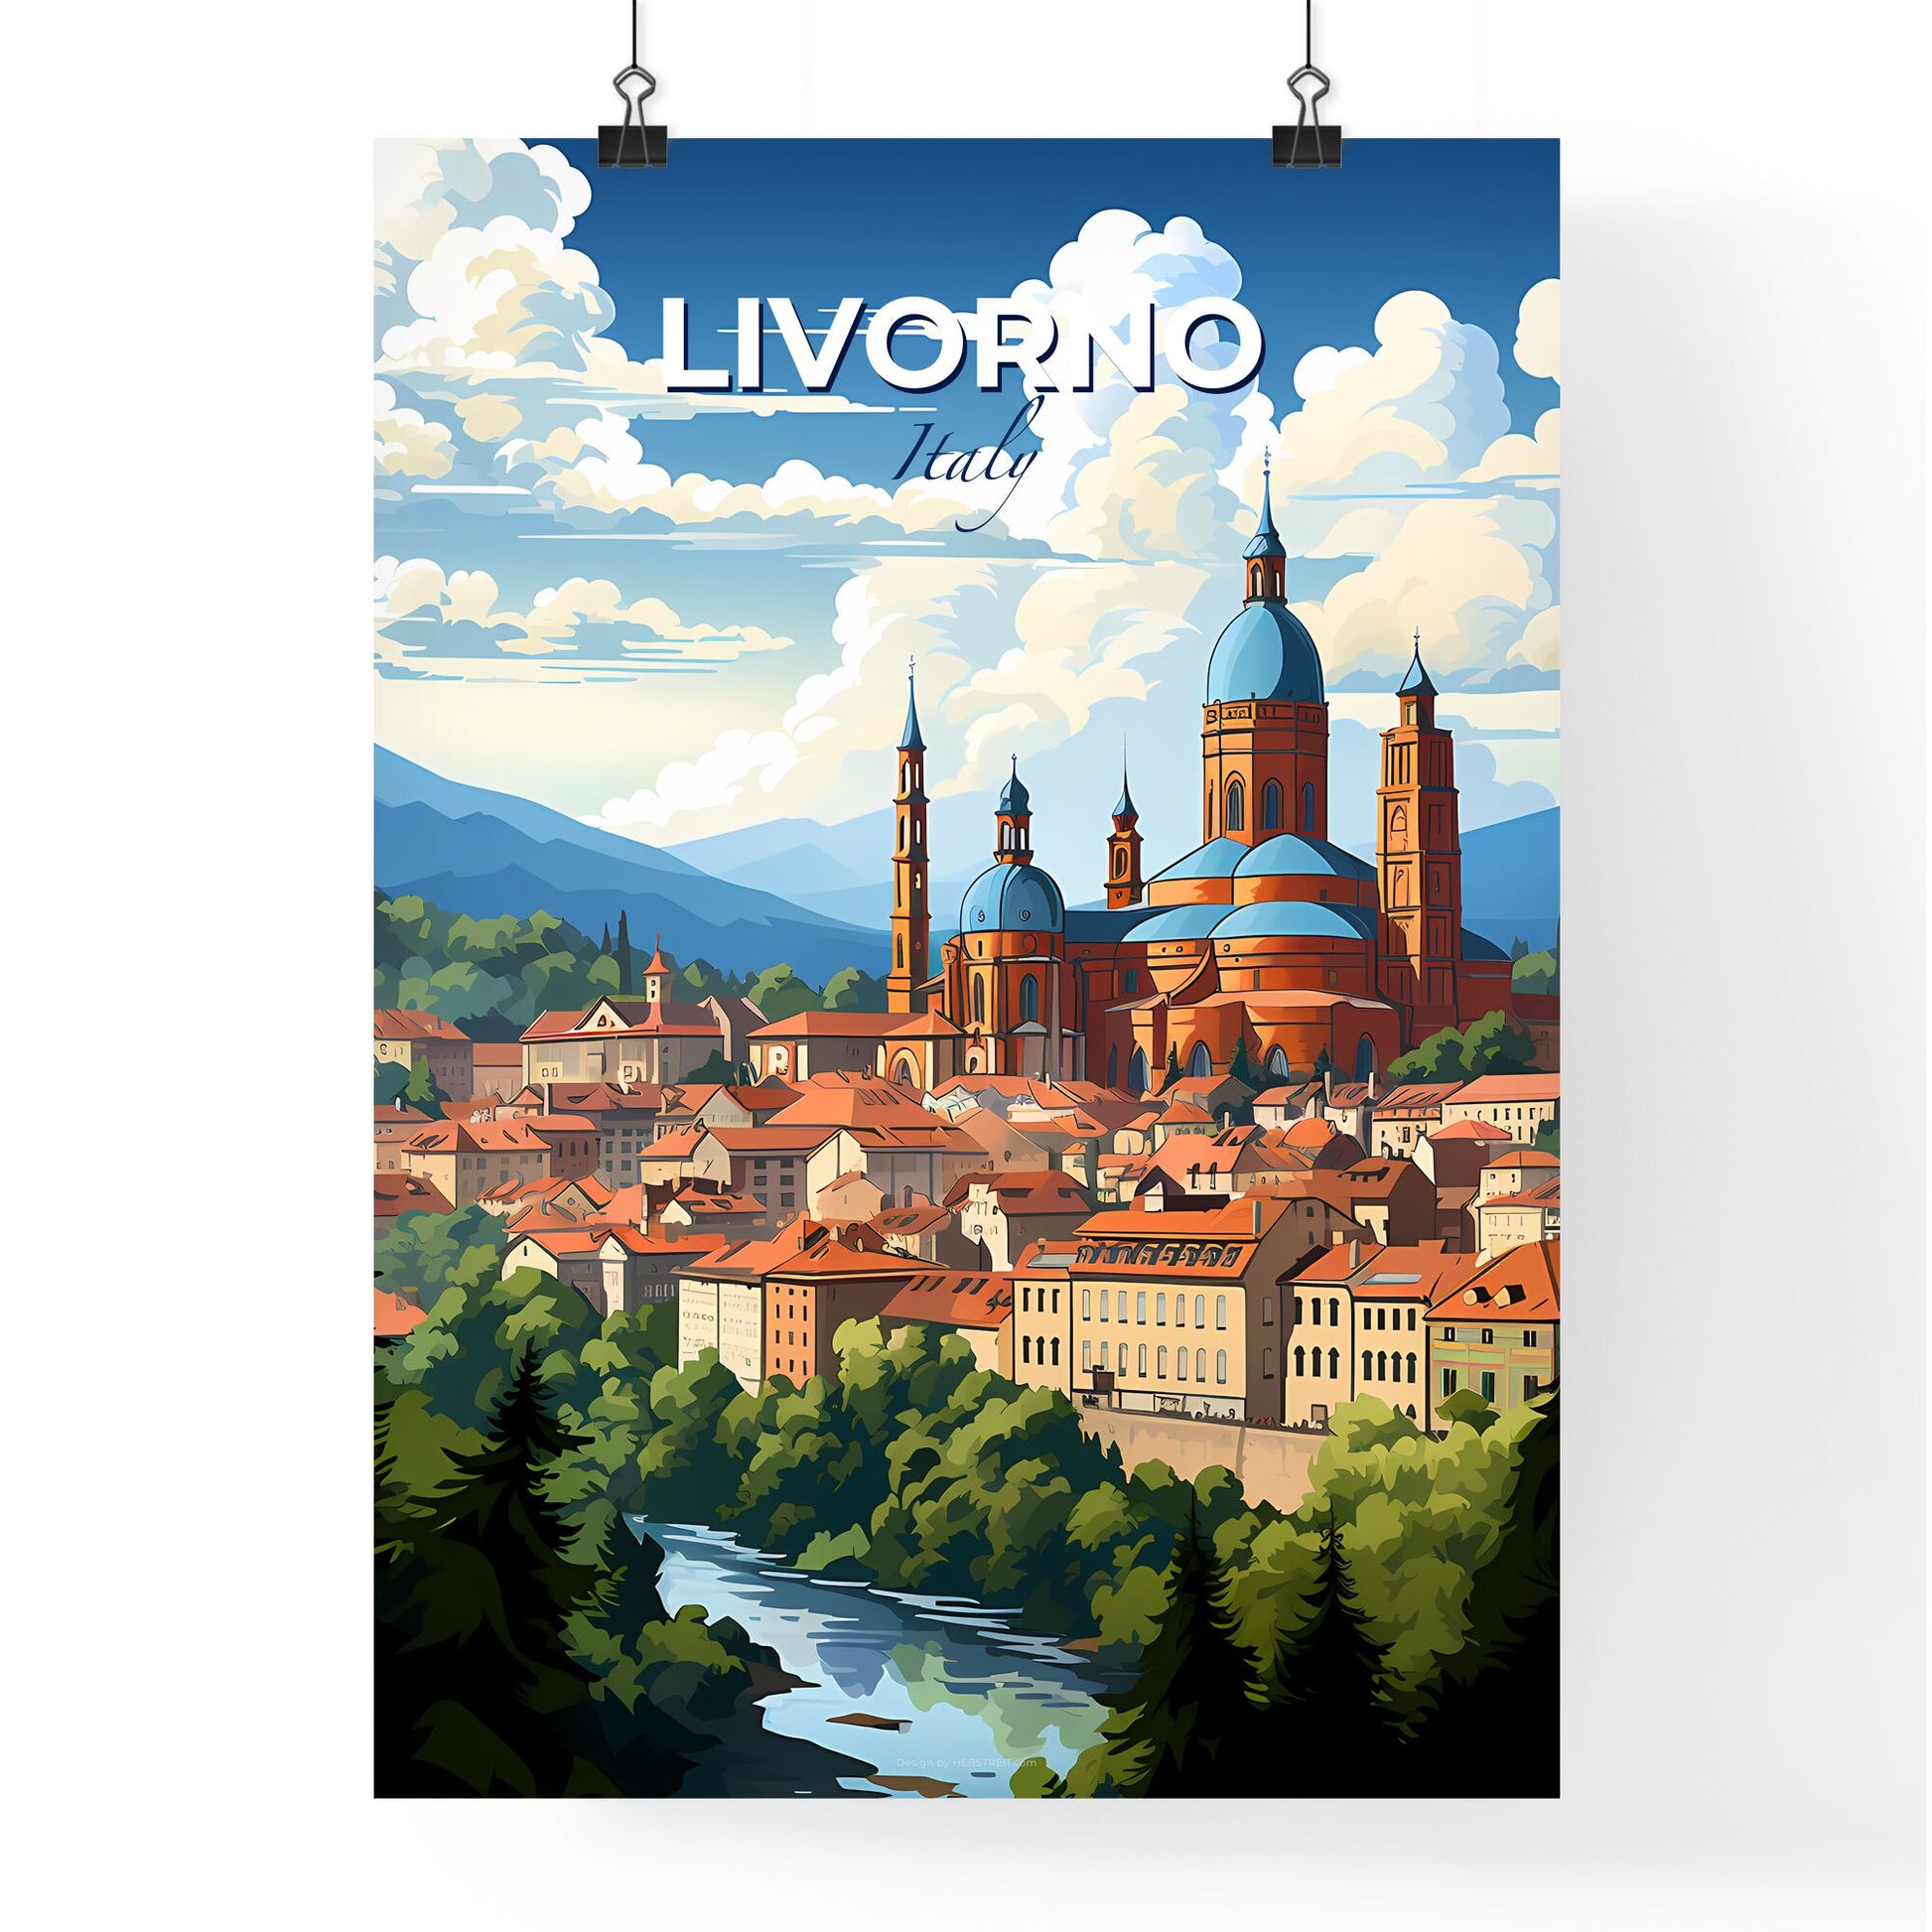 Livorno, Italy, A Poster of a city with a river and trees Default Title